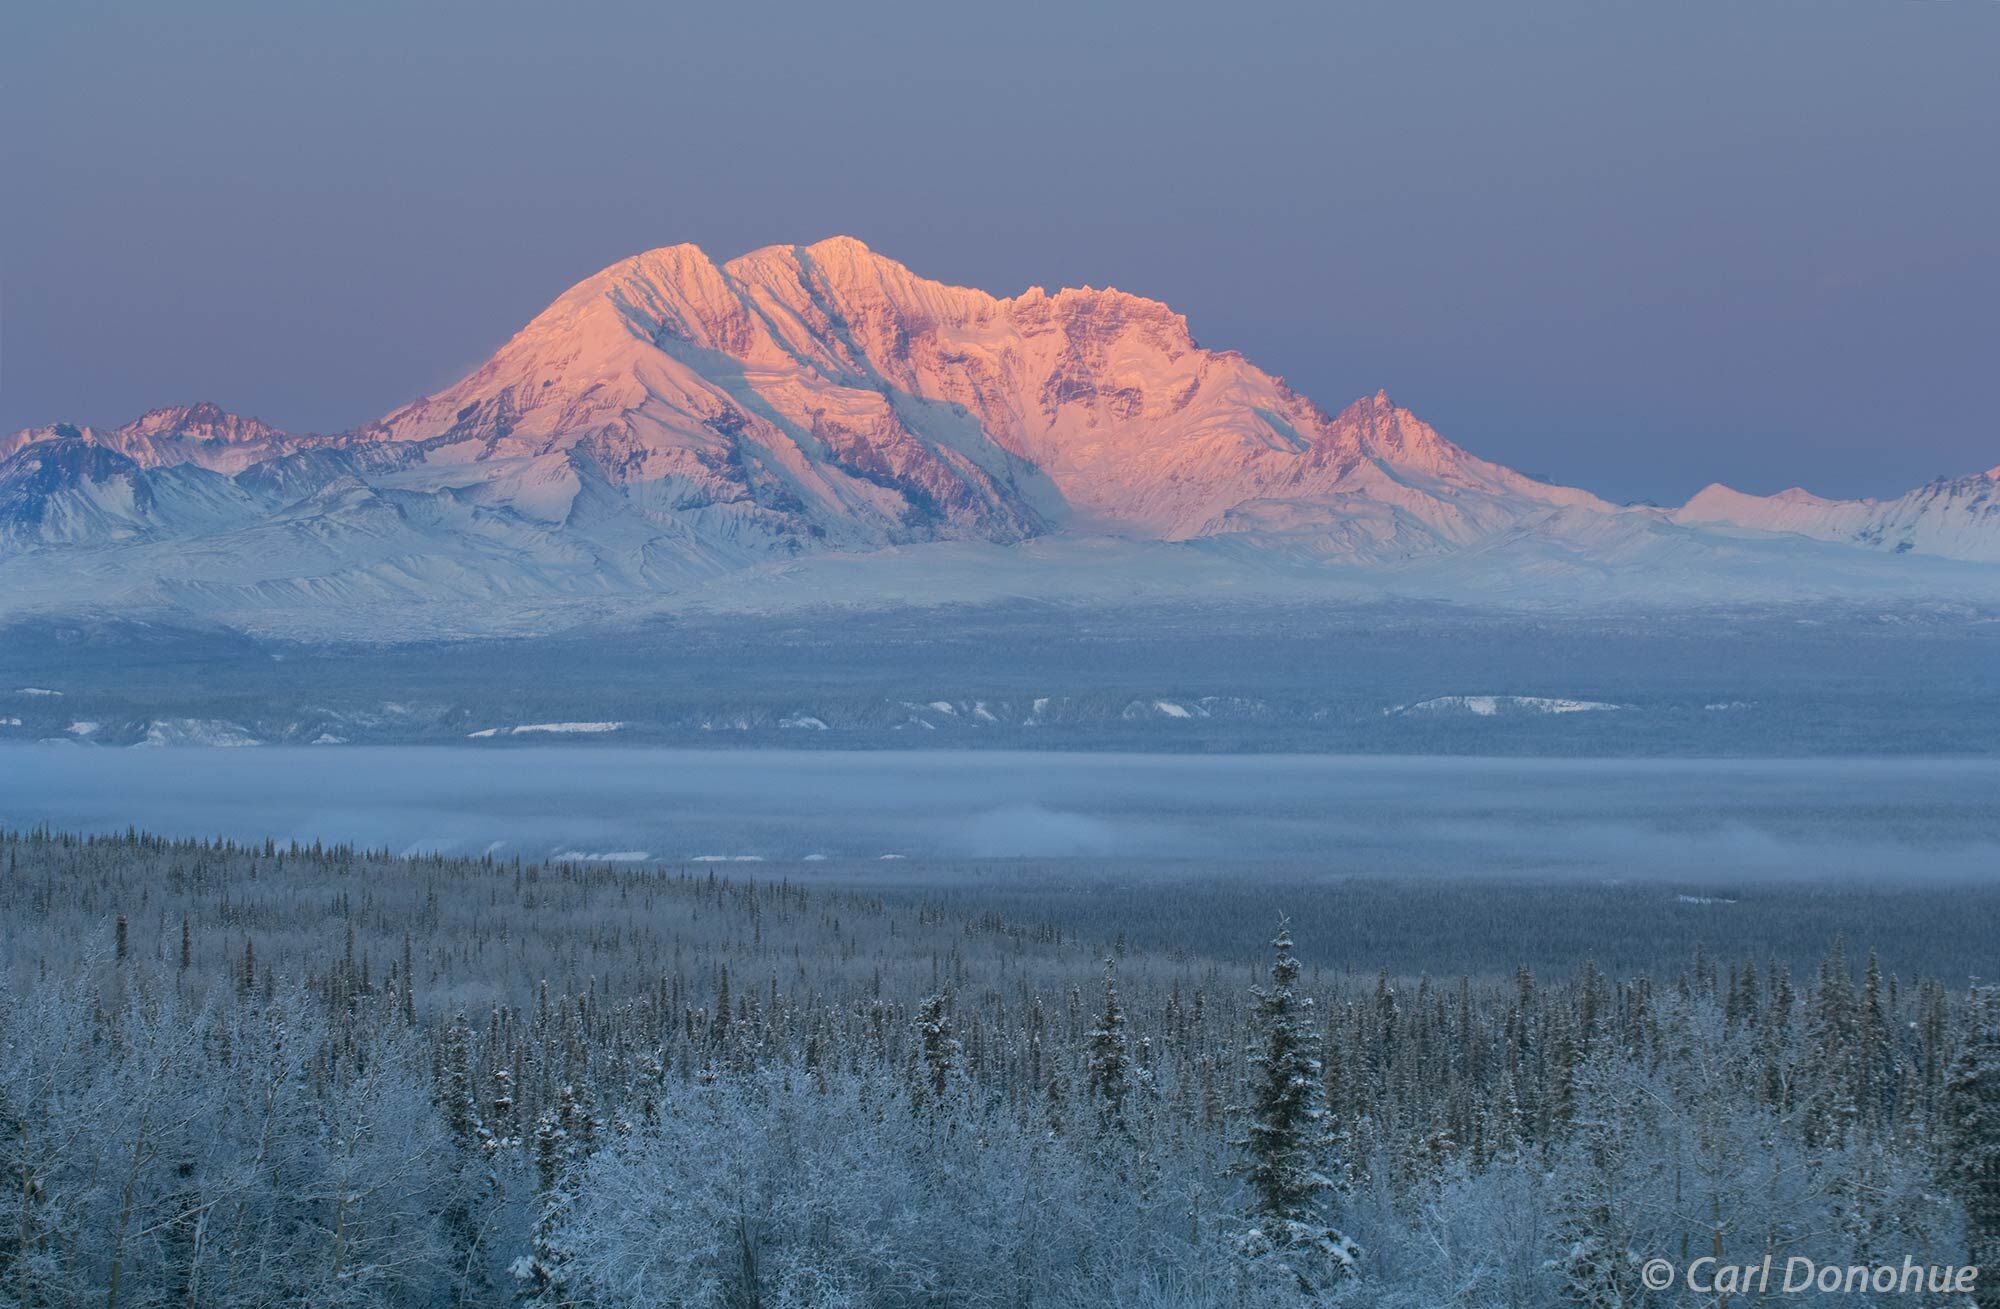 Winter alpenglow at sunset on Mount Drum. Photo shows the Copper River Basin, Wrangell-St. Elias National Park and Preserve...